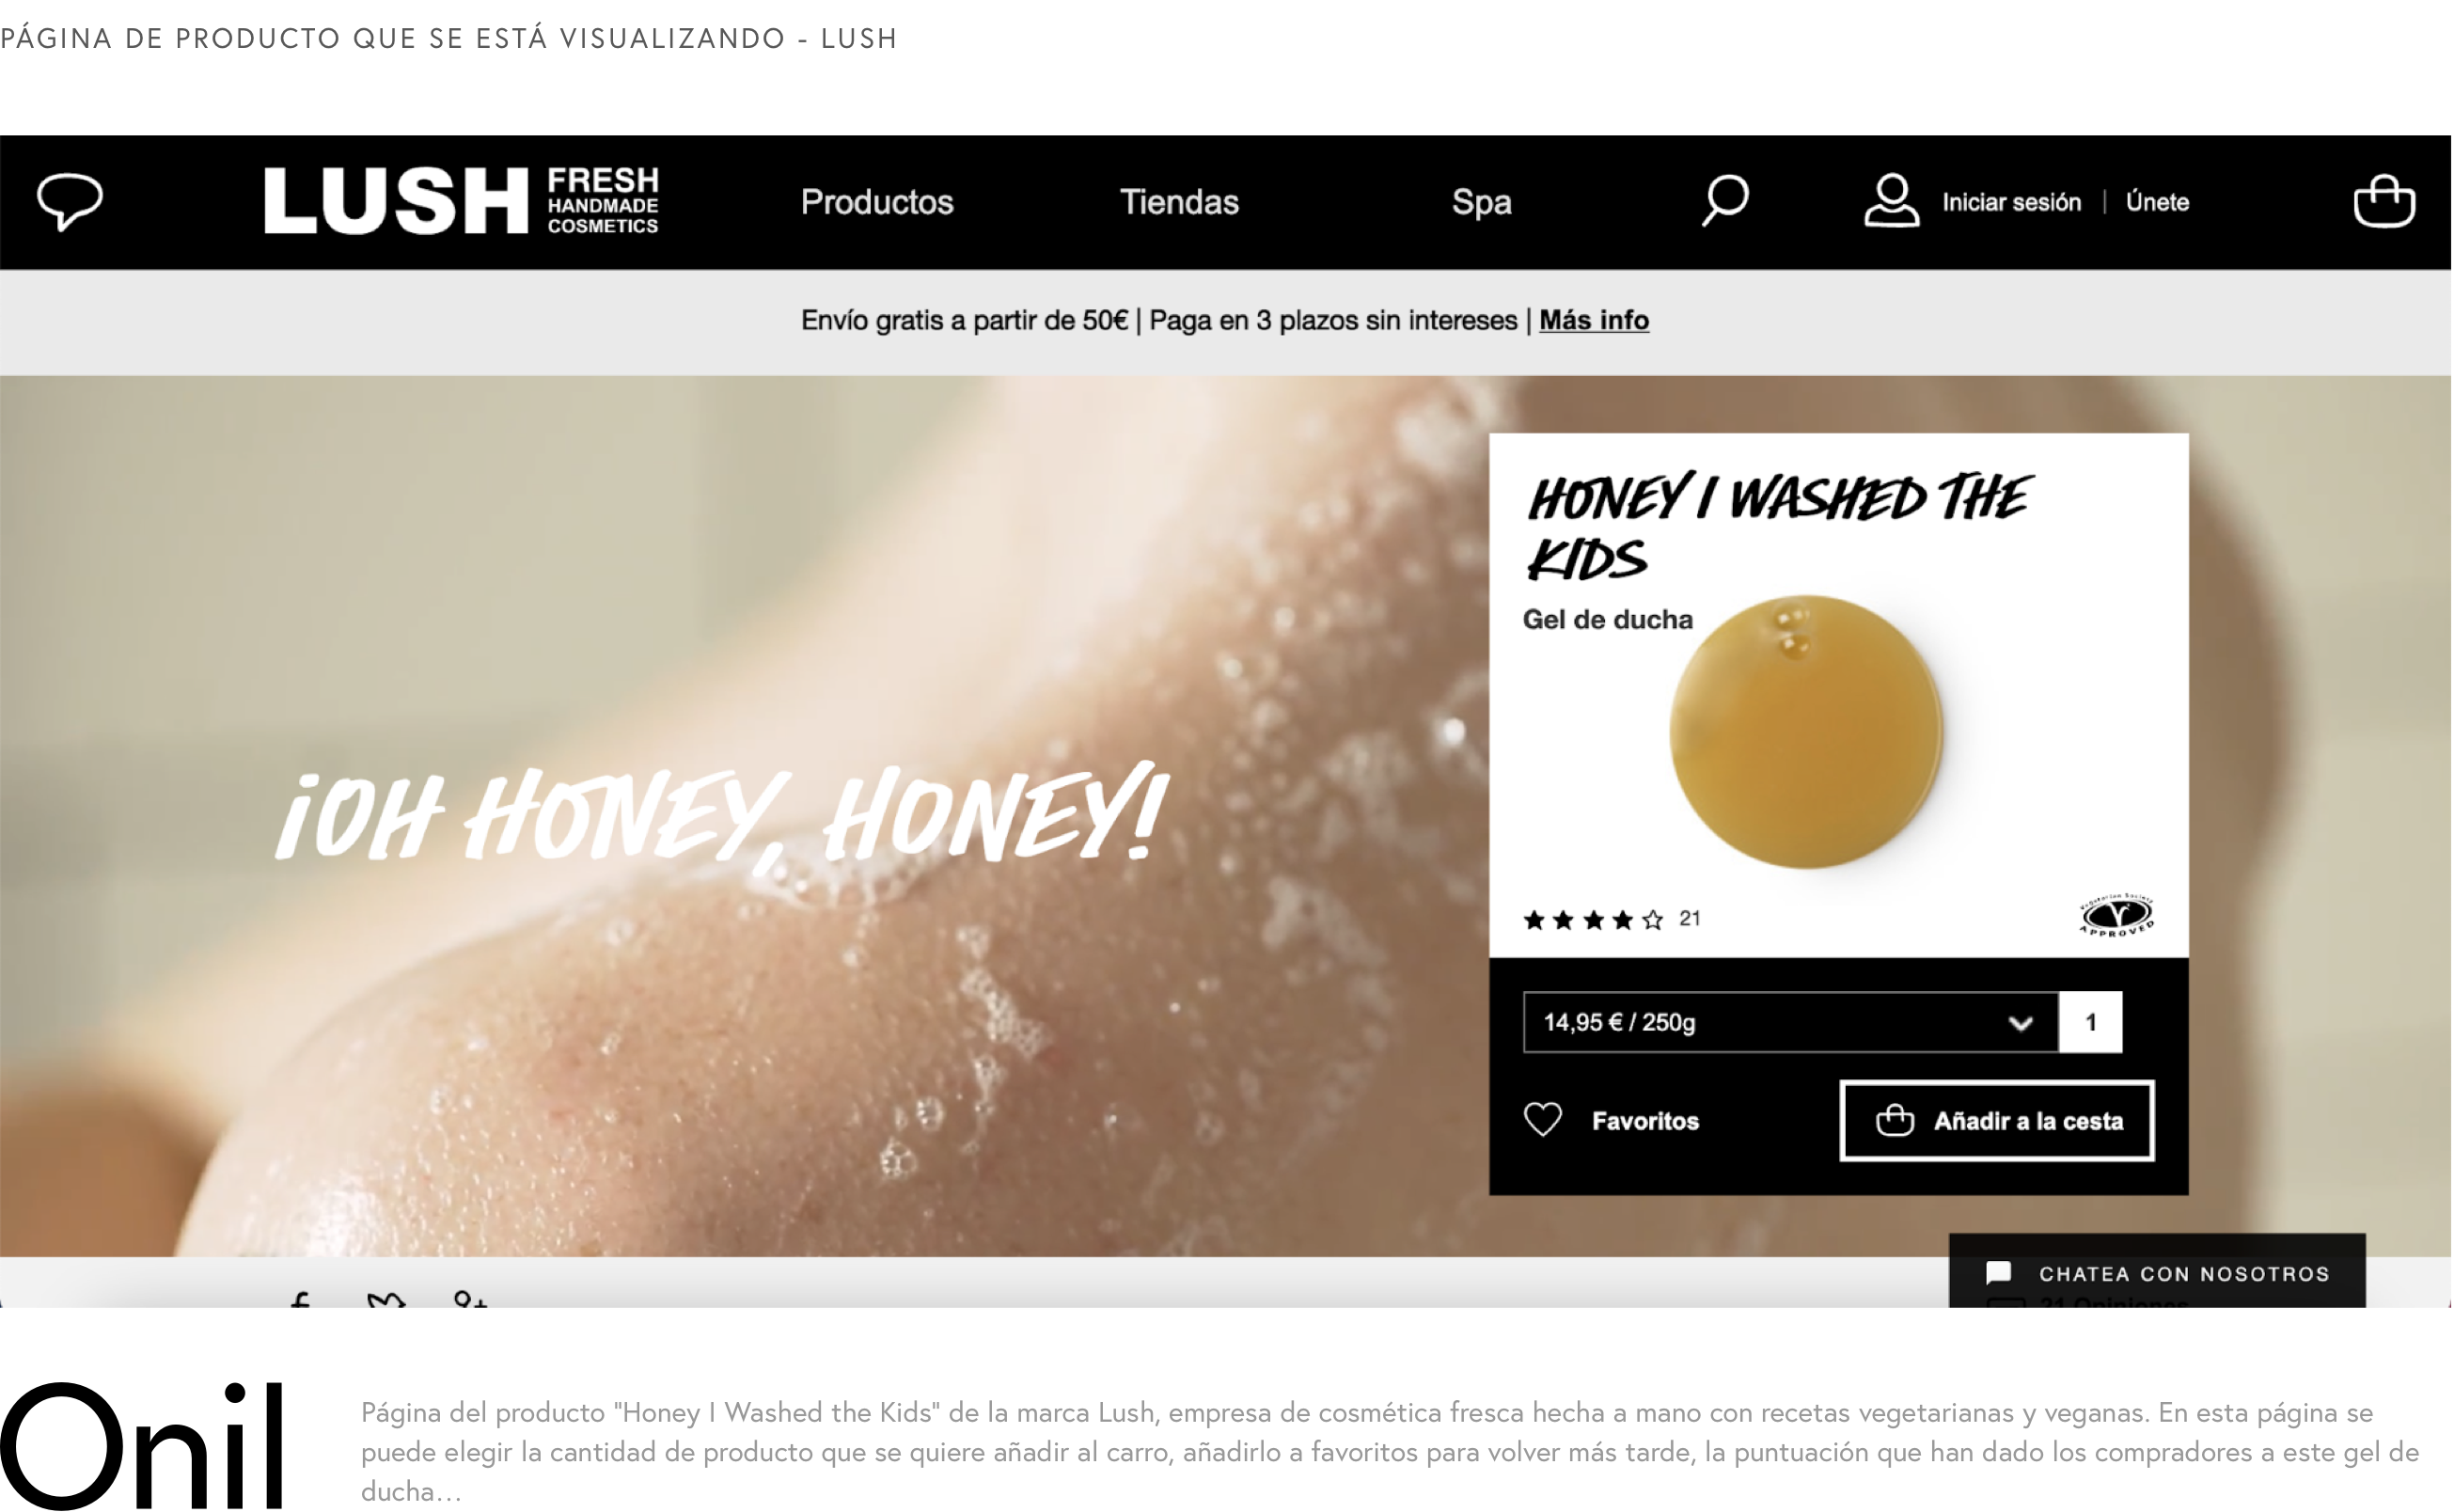 Product page being viewed on Lush - Fresh handmade cosmetics company with vegetarian and vegan recipes. On this page you can choose the amount of product you want to add to the cart, add it to favorites to come back later, the score that buyers have given this shower gel...